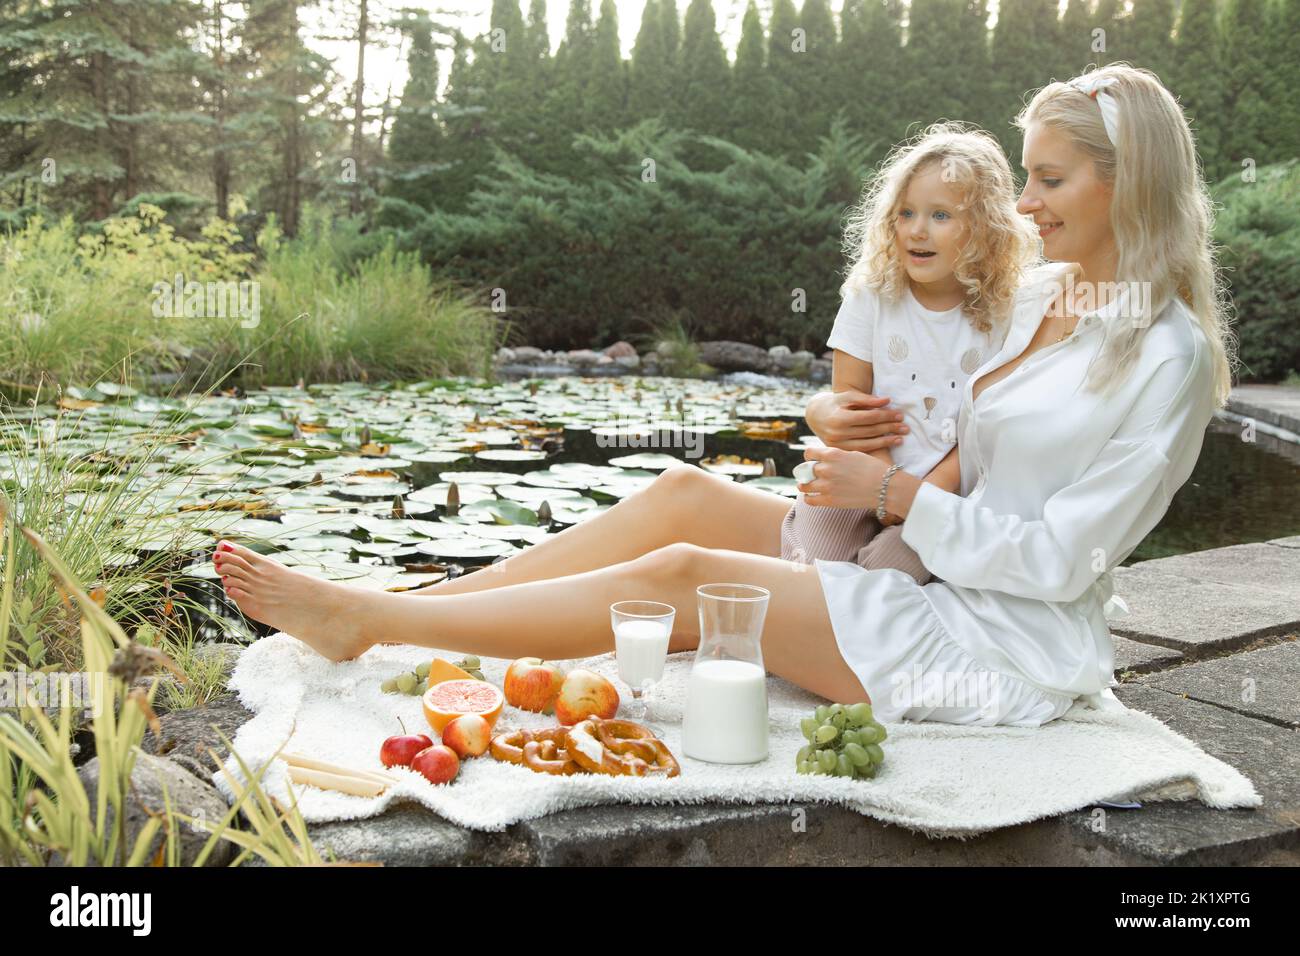 Joyful, smiling woman hold little blonde girl, have lunch on picnic in park near lake outdoors. Healthy ecological food Stock Photo